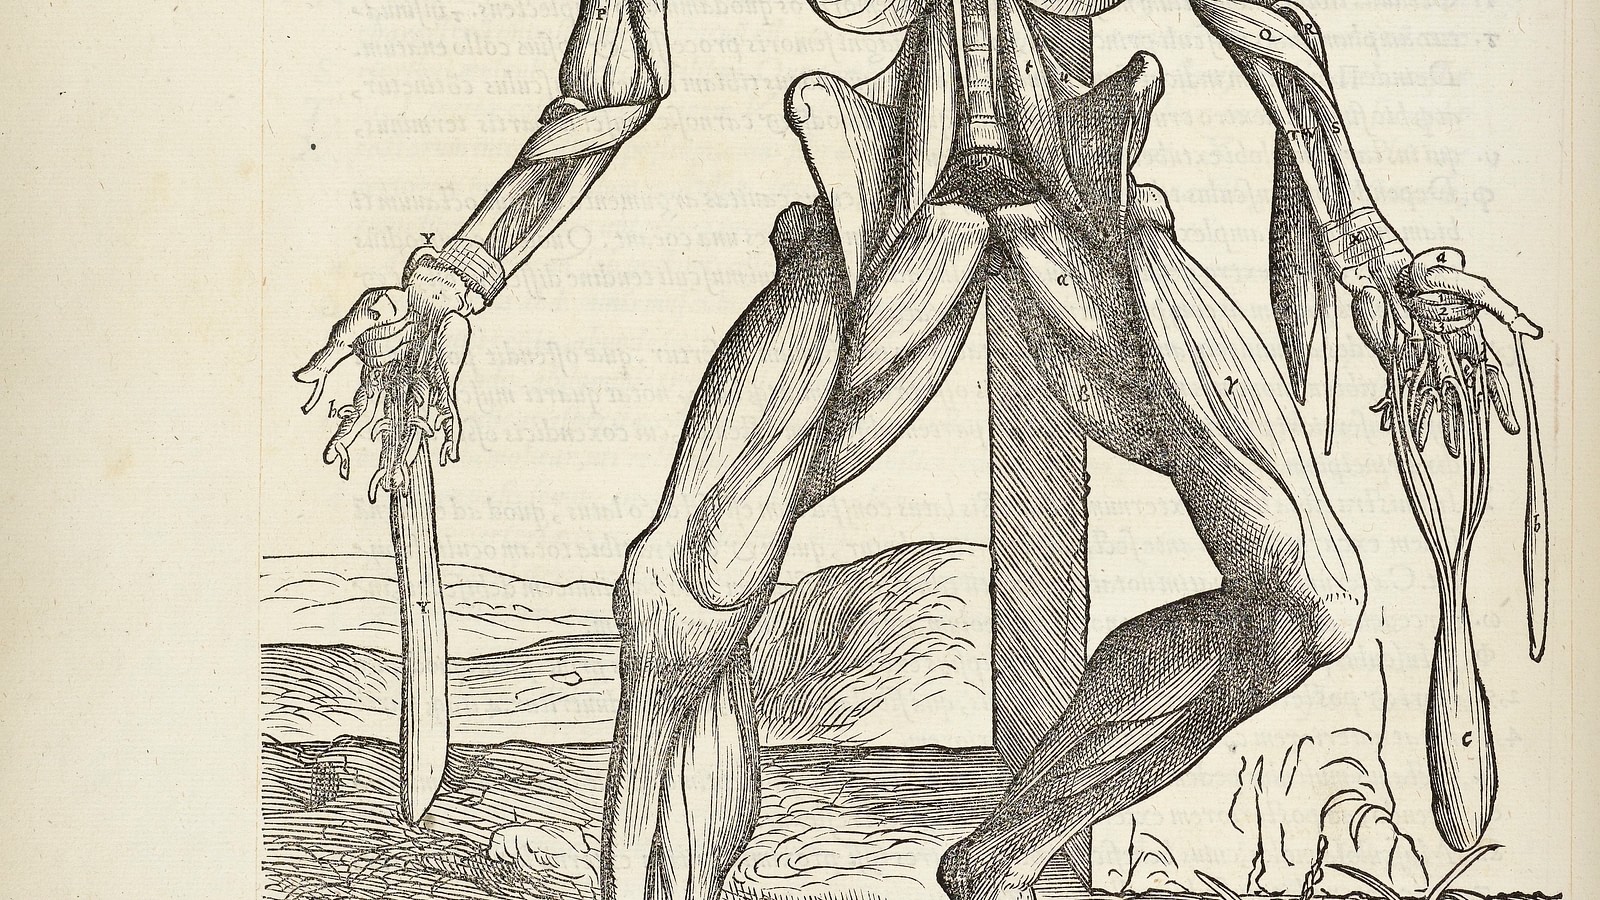 Brains, Brawn, & Beauty: Andreas Vesalius and the Art of Anatomy | Books,  Health and History